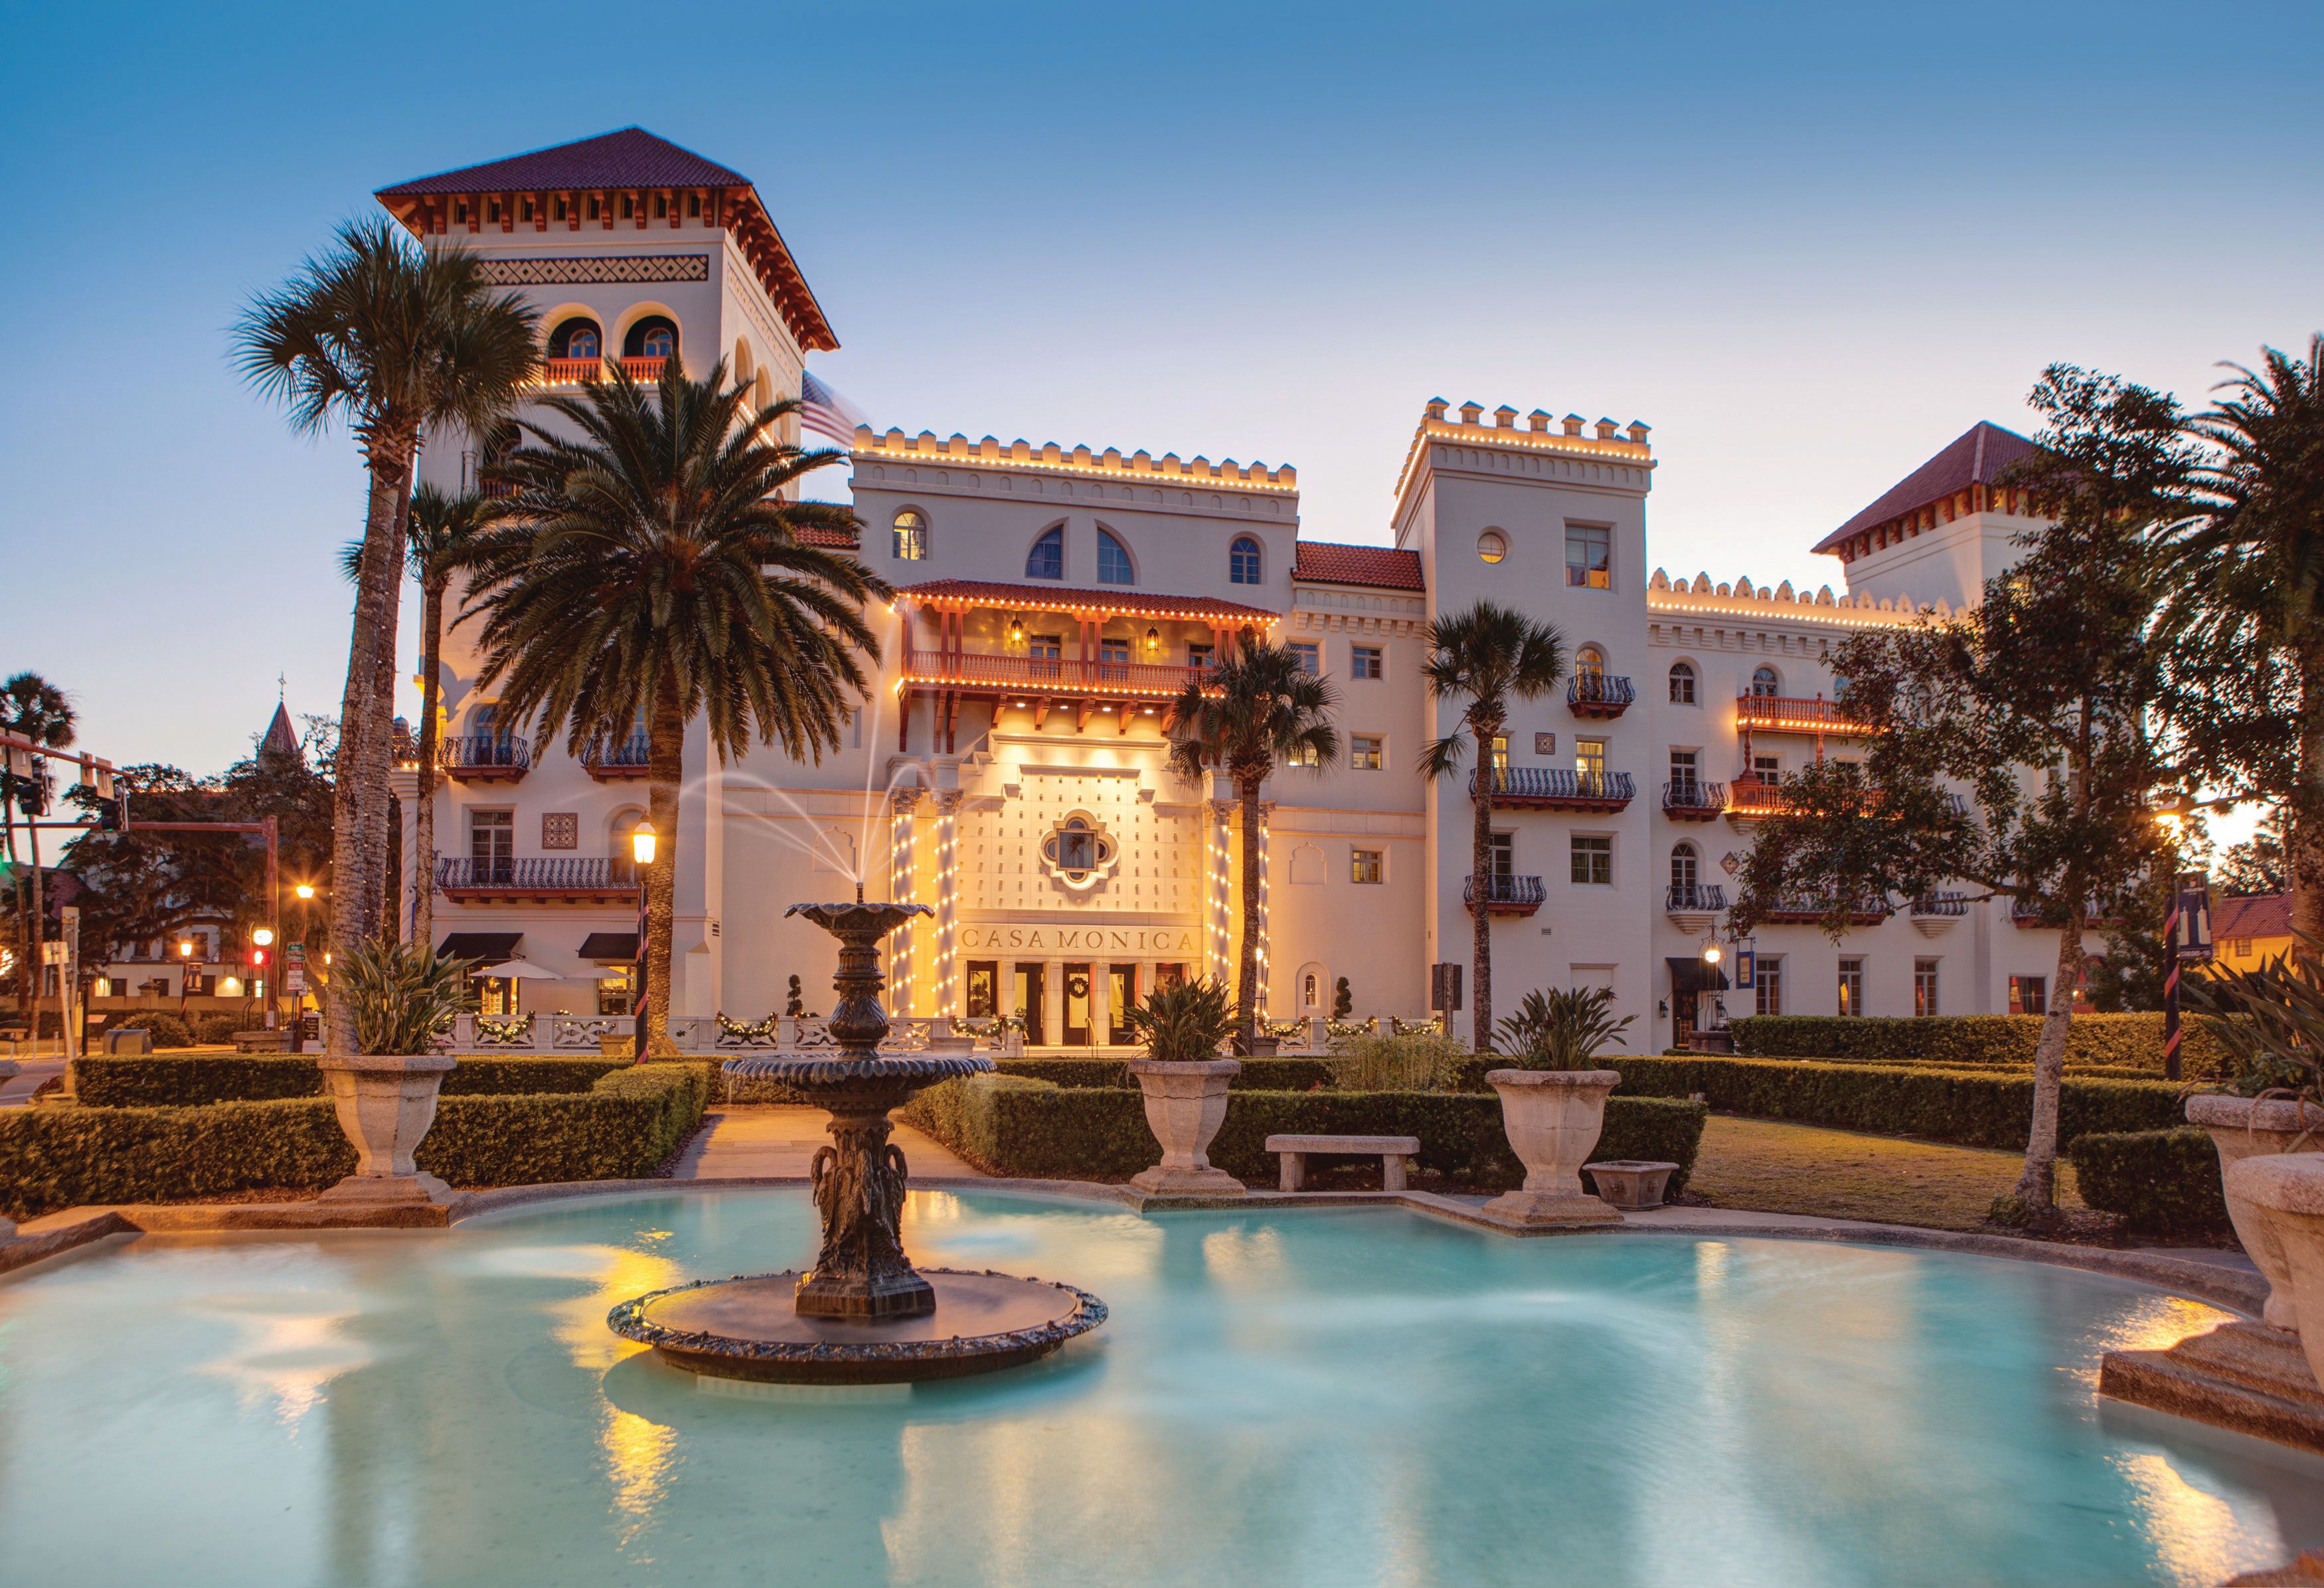 3 Fabulous Hotels in Historic Southern Cities for Your Next Getaway